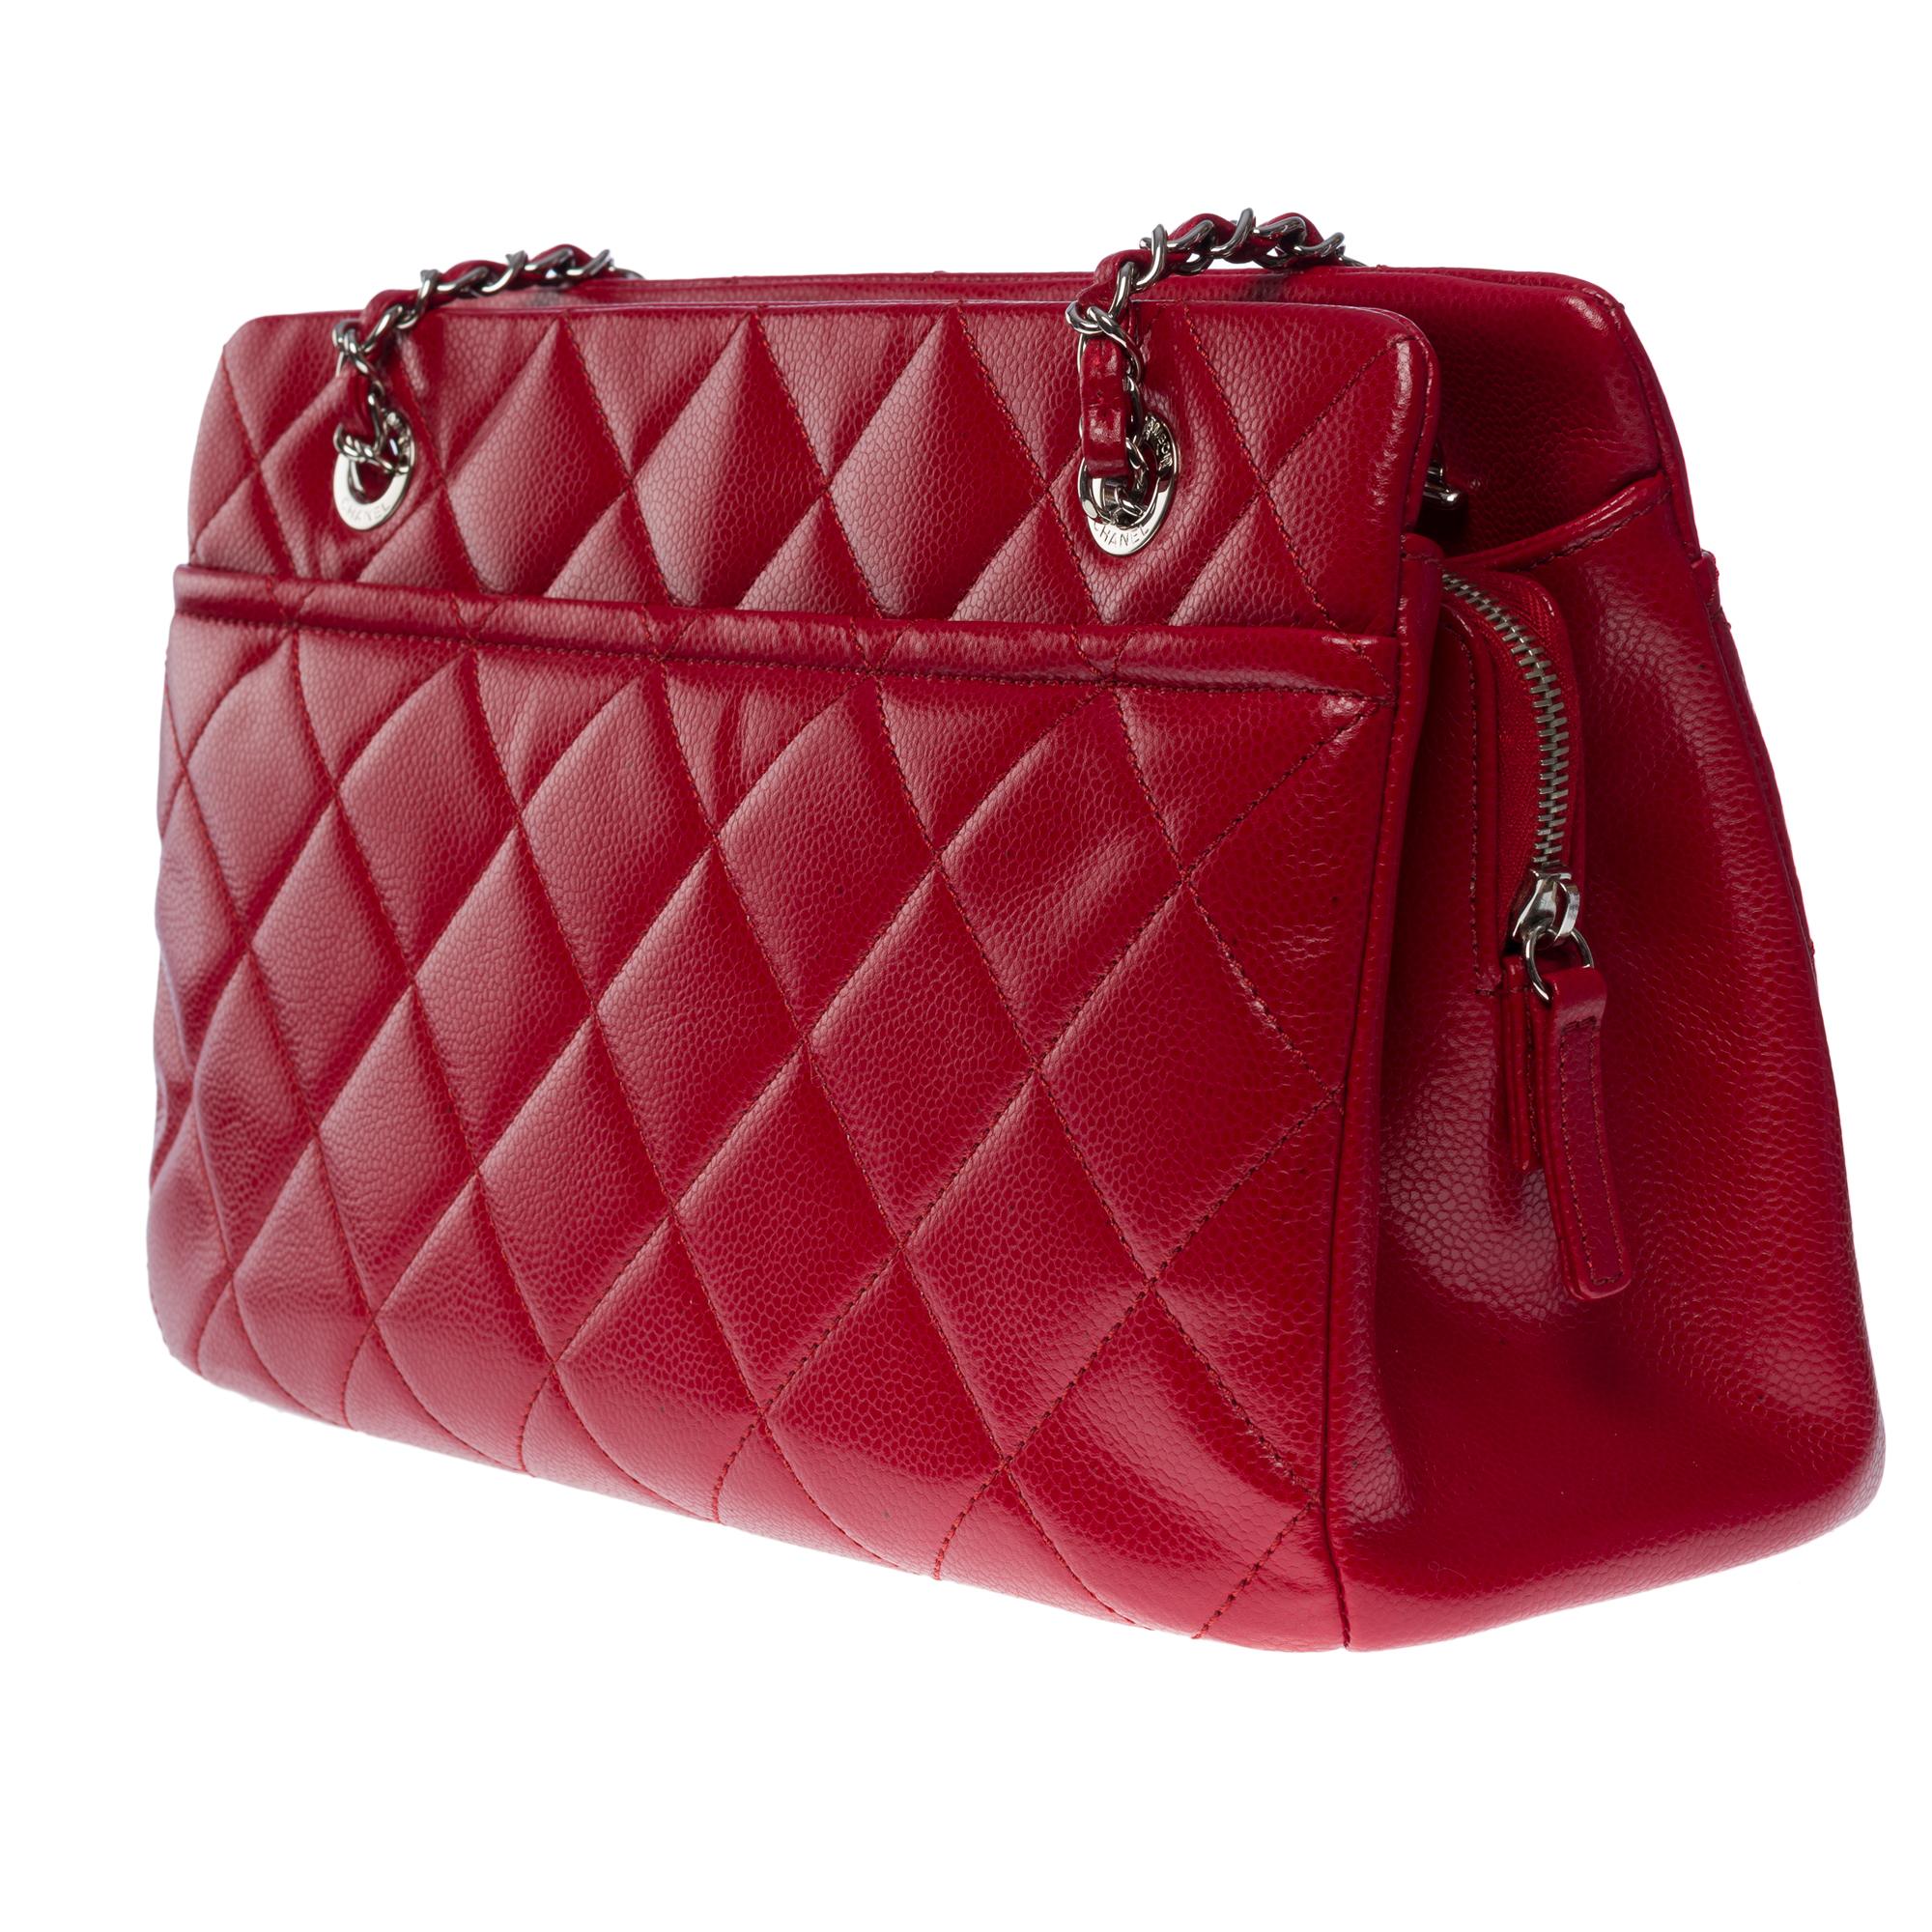 Women's Bright & Amazing Chanel Shopping Tote bag in Red Caviar quilted leather, SHW